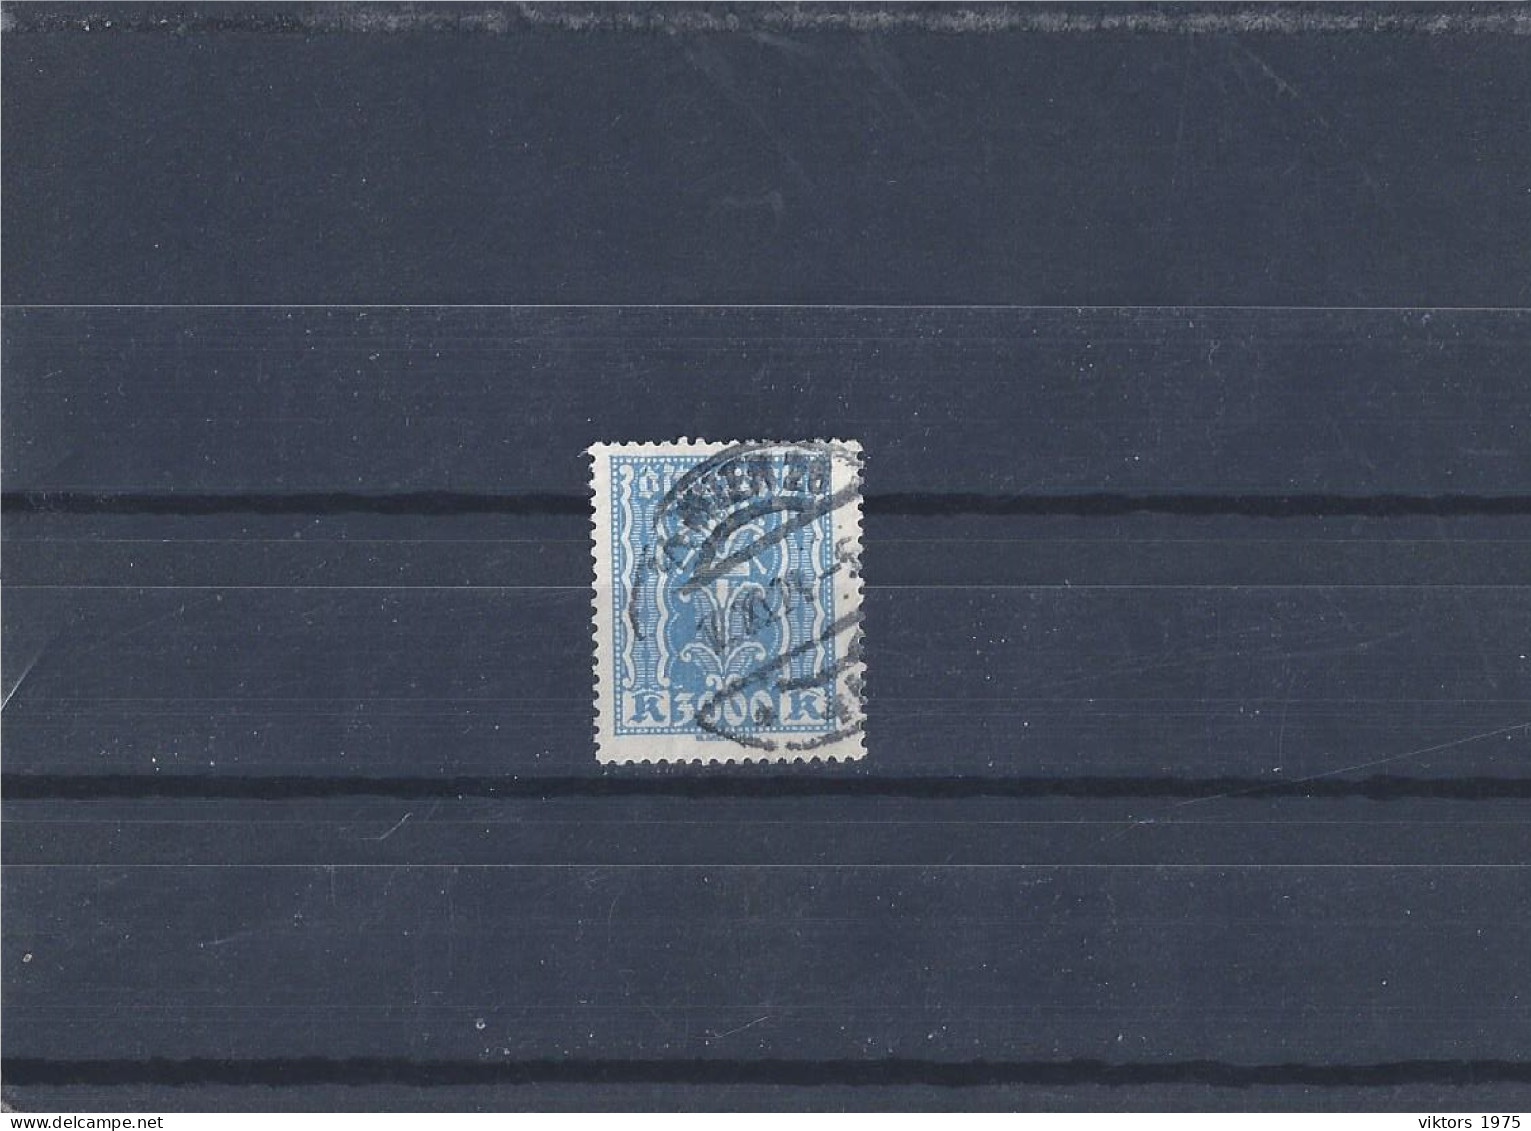 Used Stamp Nr.396 In MICHEL Catalog - Used Stamps